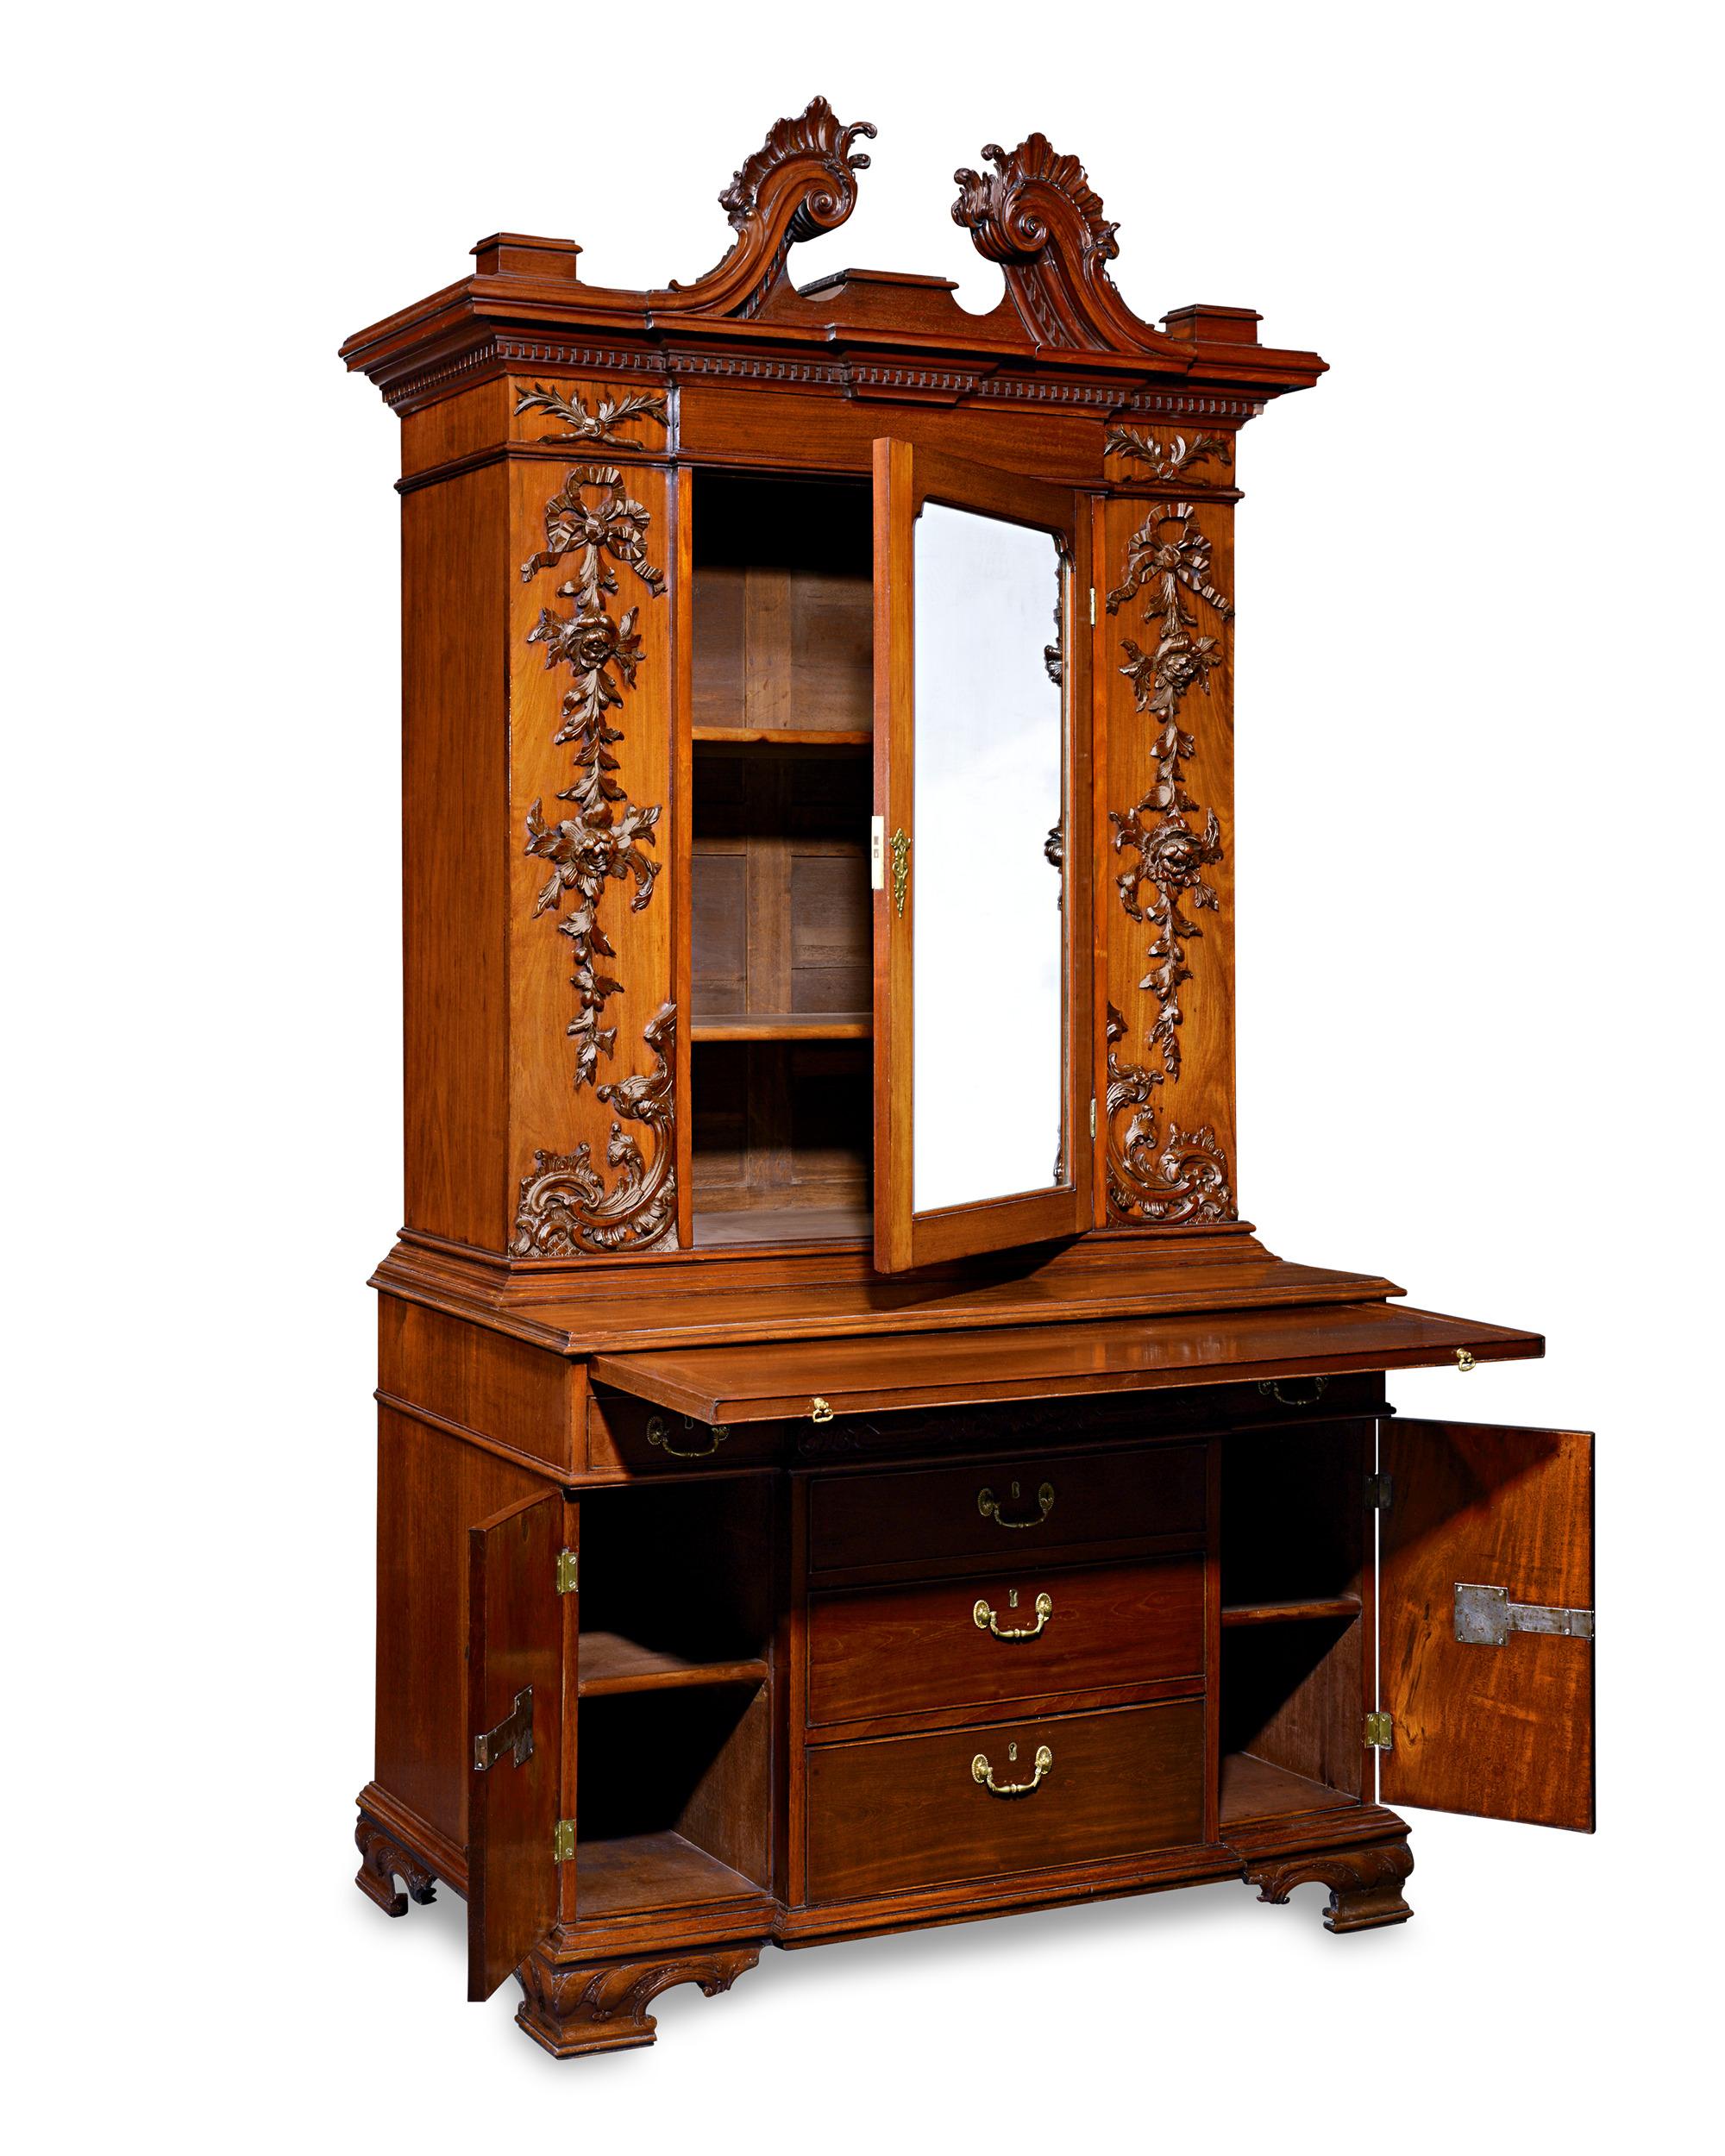 This extraordinary Irish bureau cabinet was crafted based on a design for a desk and bookcase drawn from Thomas Chippendale’s famed 1762 edition of The Gentleman and Cabinet-Maker's Director. Chippendale’s revolutionary designs came to define the